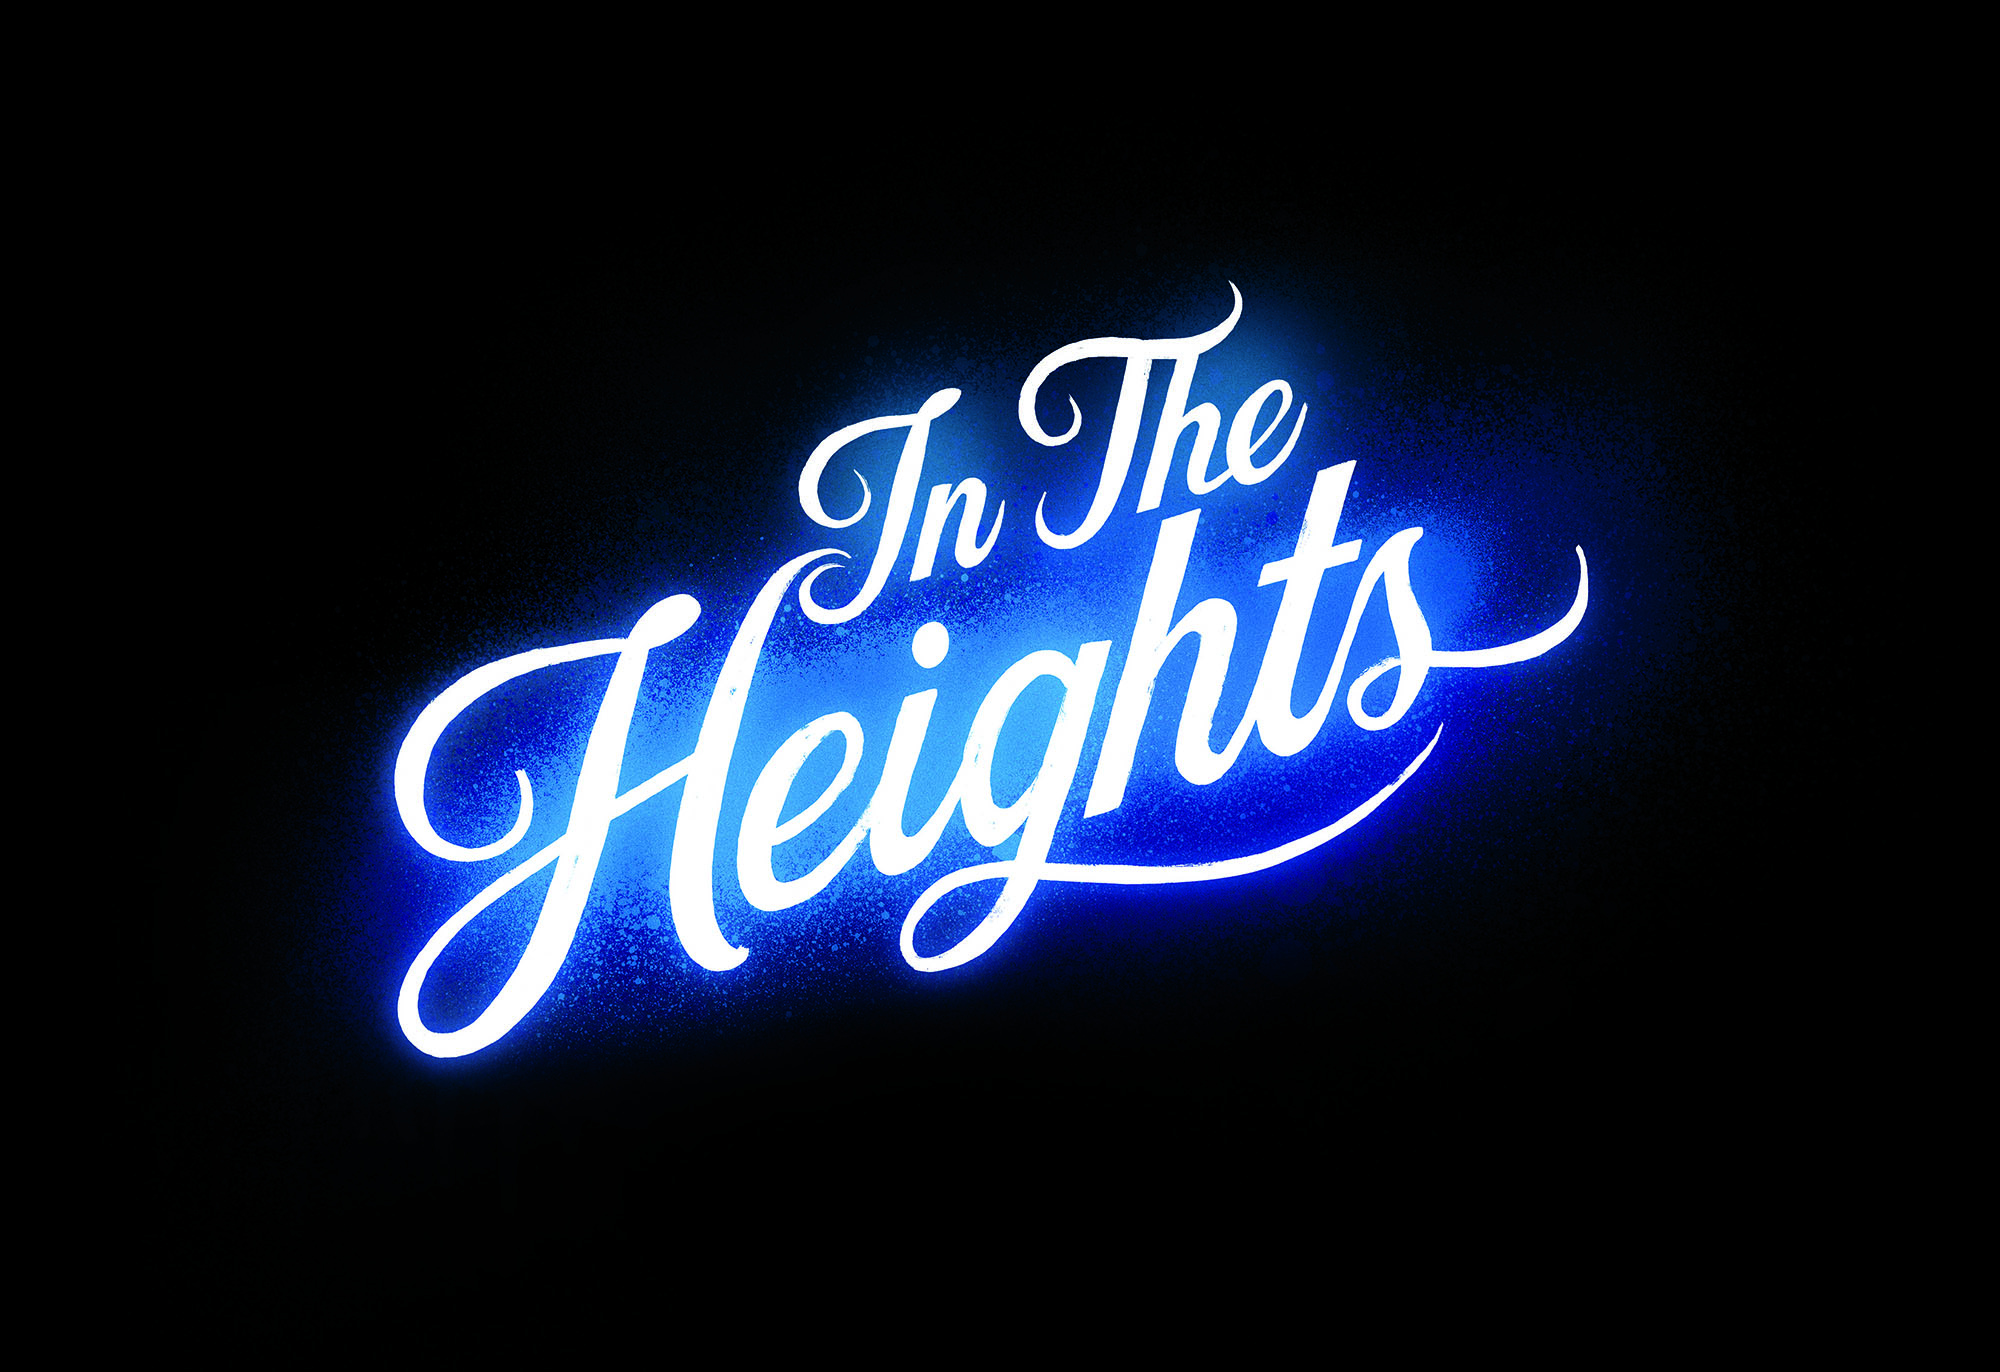 GRAPHIC: Main title text of "In The Heights" on a black background. Photo courtesy of Warner Bros. Entertainment Inc.